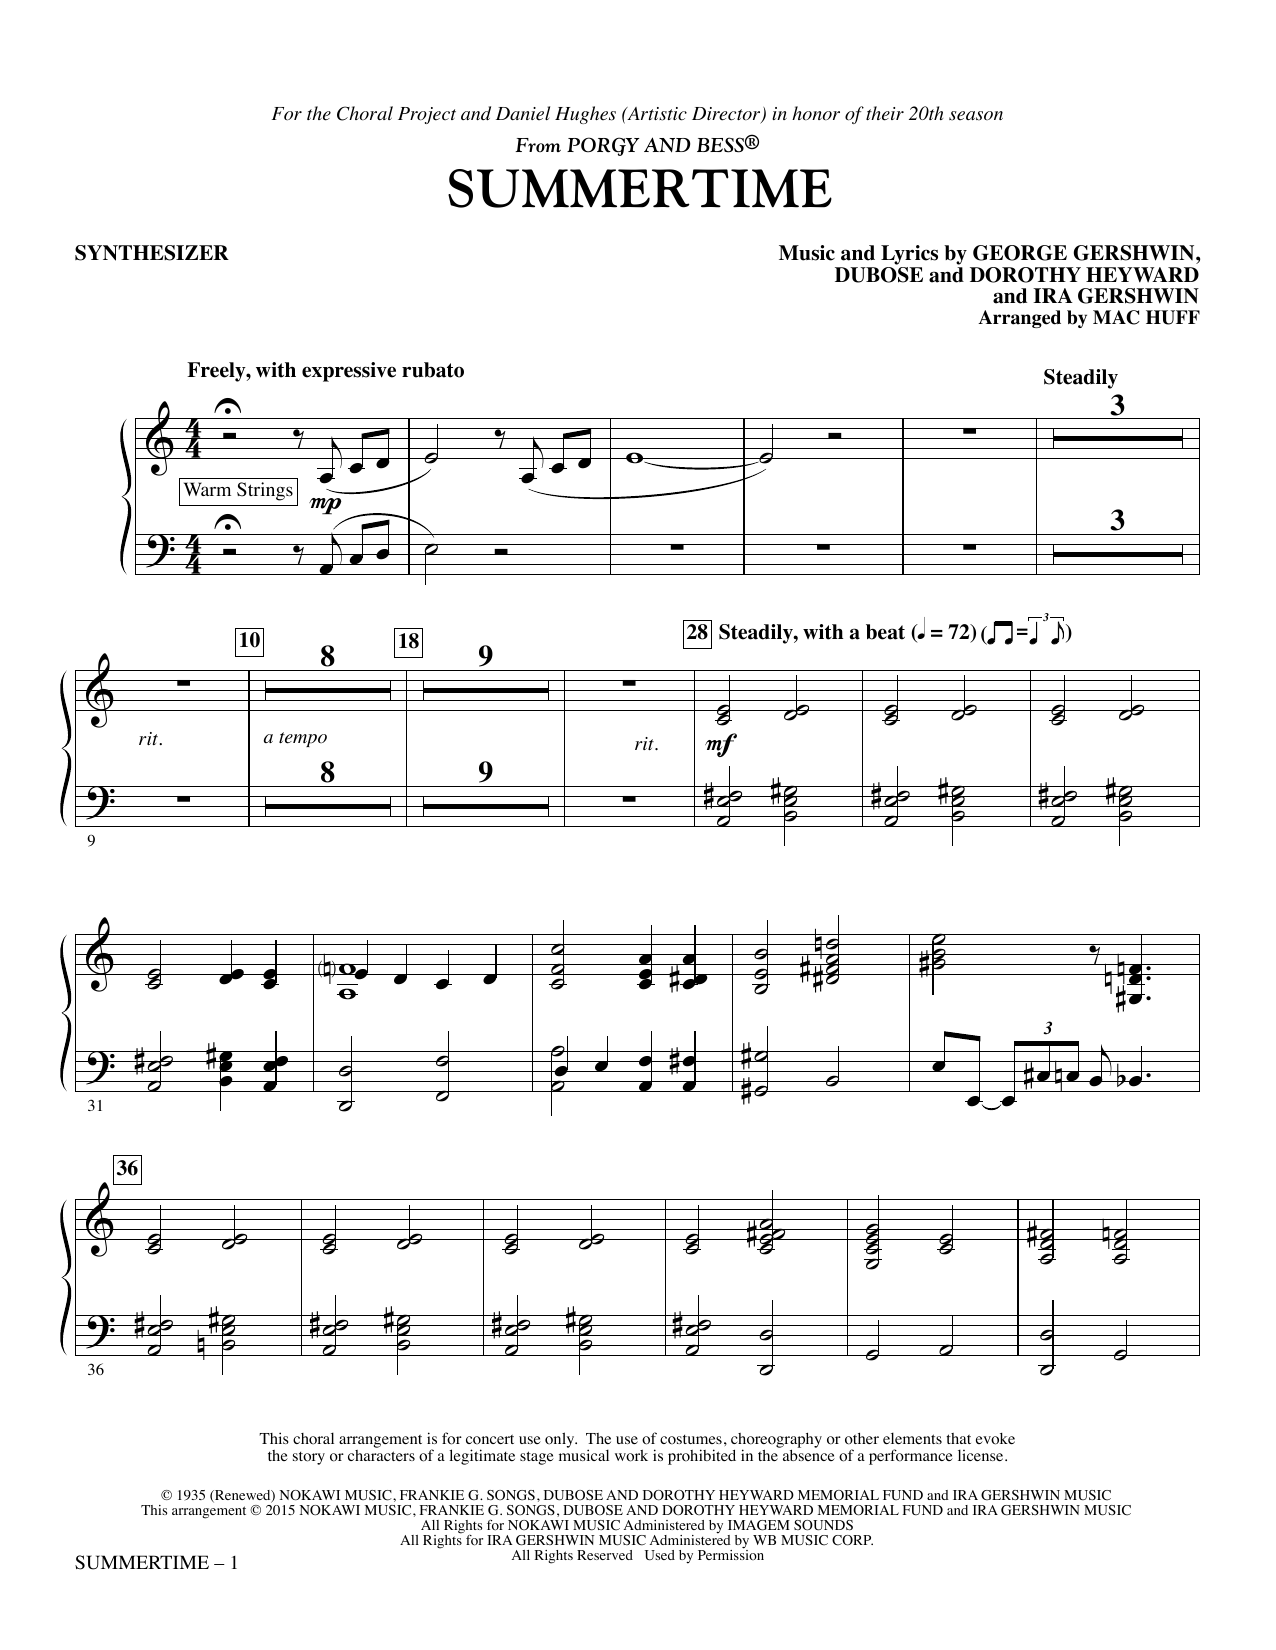 George Gershwin Summertime - Synthesizer sheet music notes and chords. Download Printable PDF.